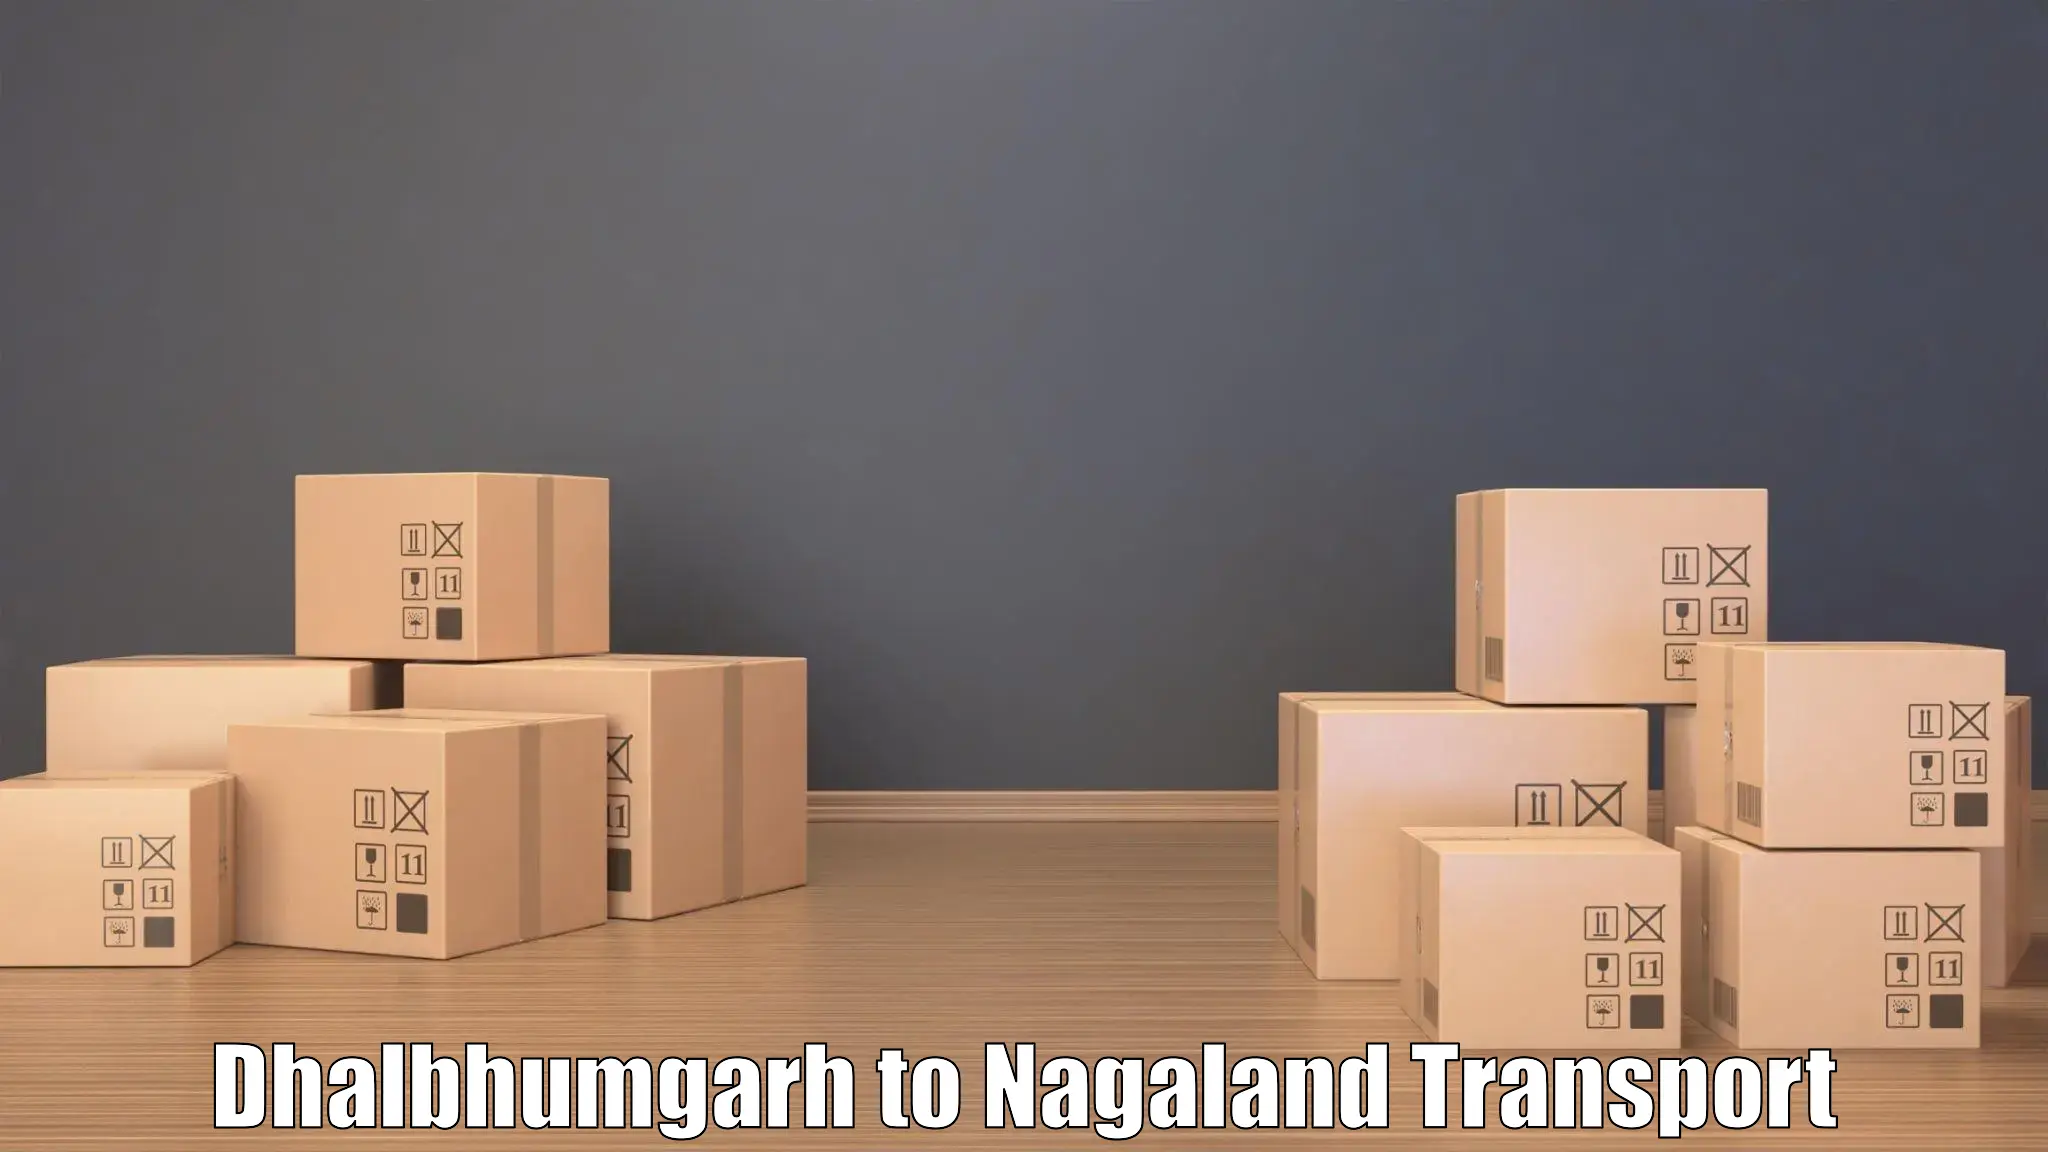 Express transport services in Dhalbhumgarh to Kohima